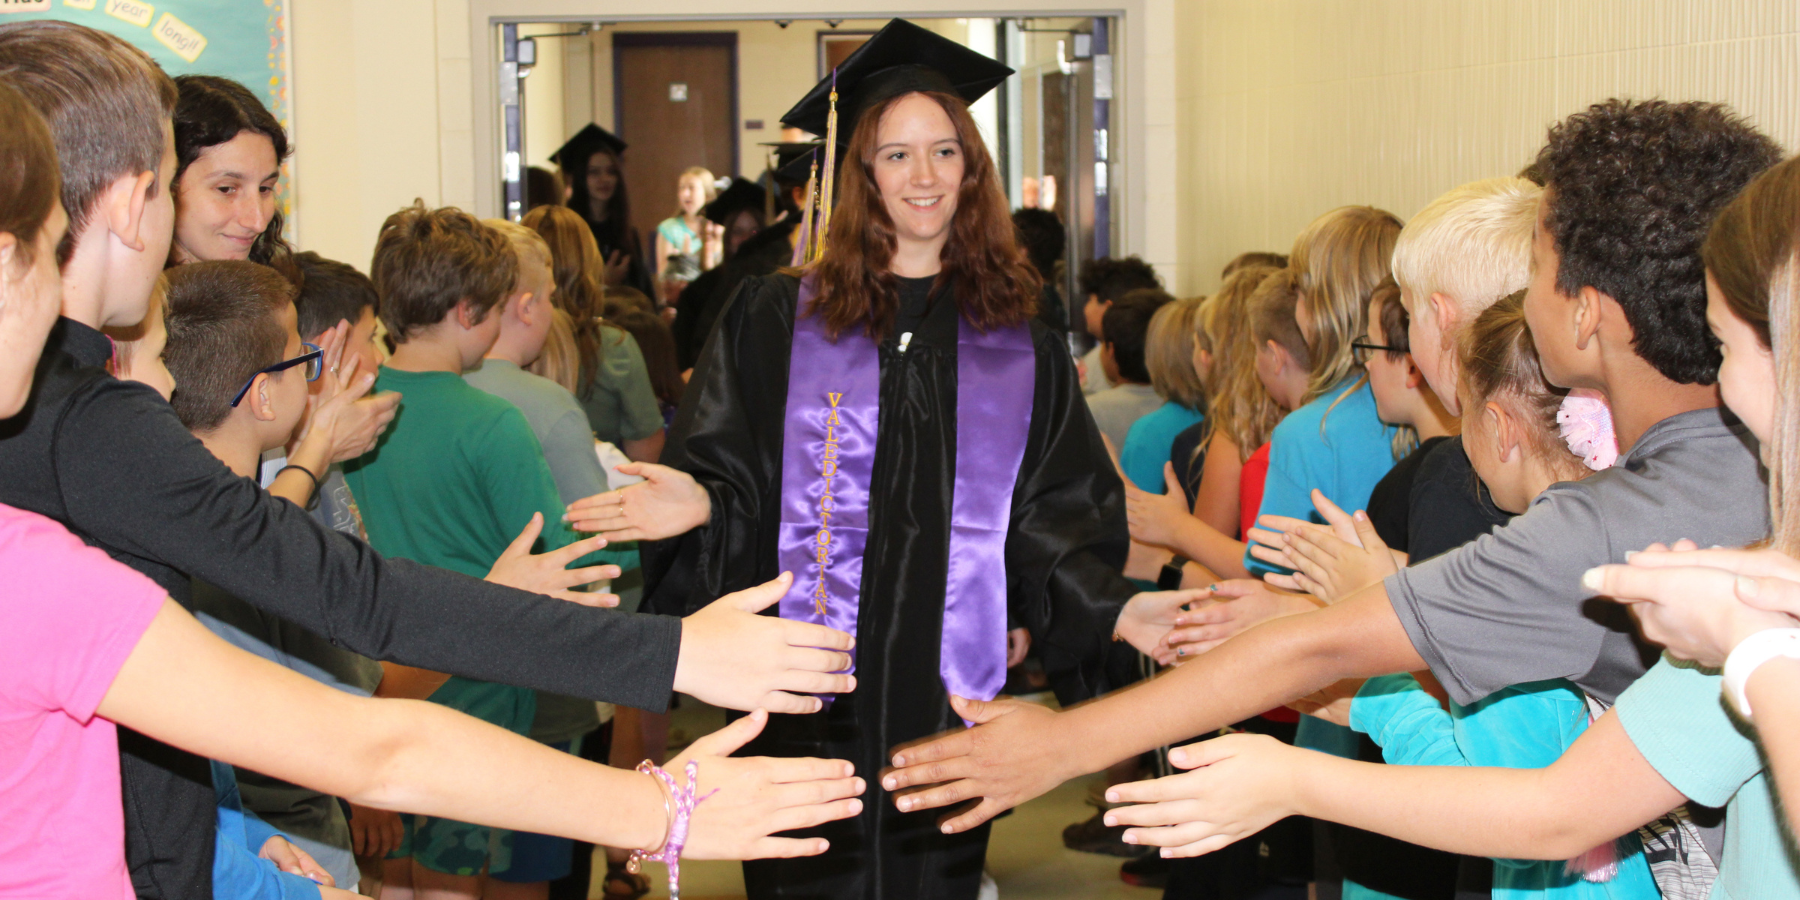 a young woman wearing a graduation gown walks through the hallway and high fives younger students